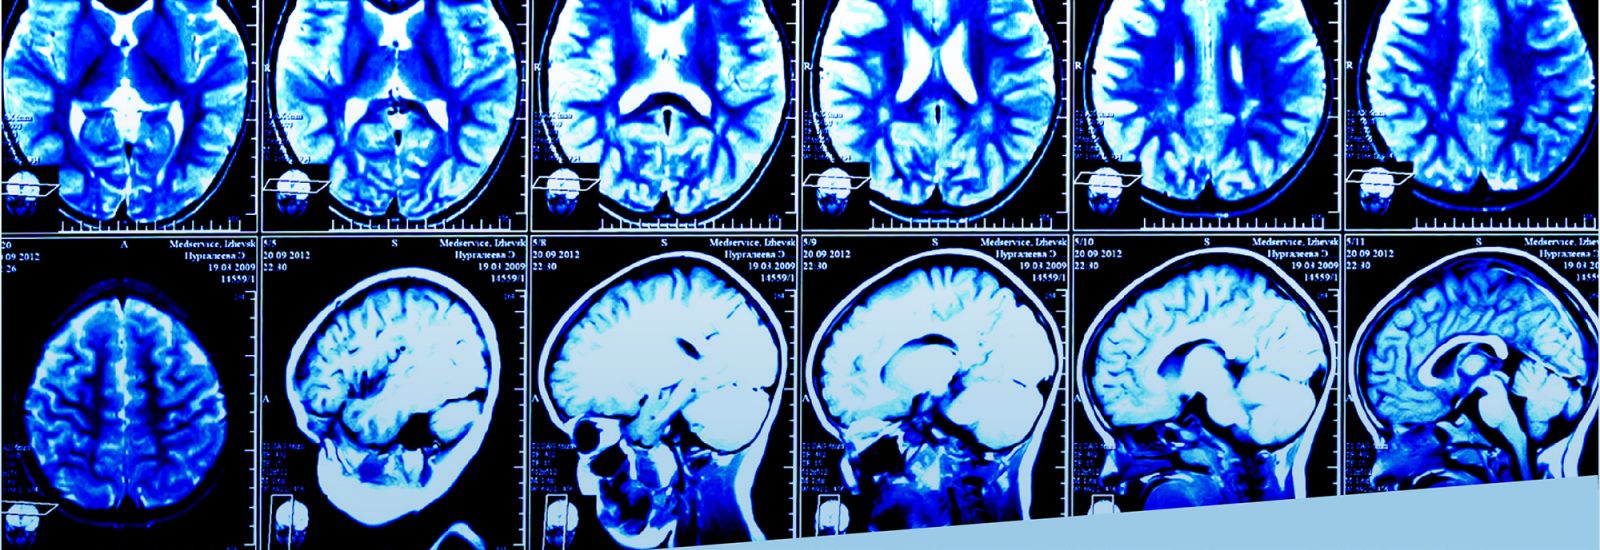 Rows of CT scan images of a brain